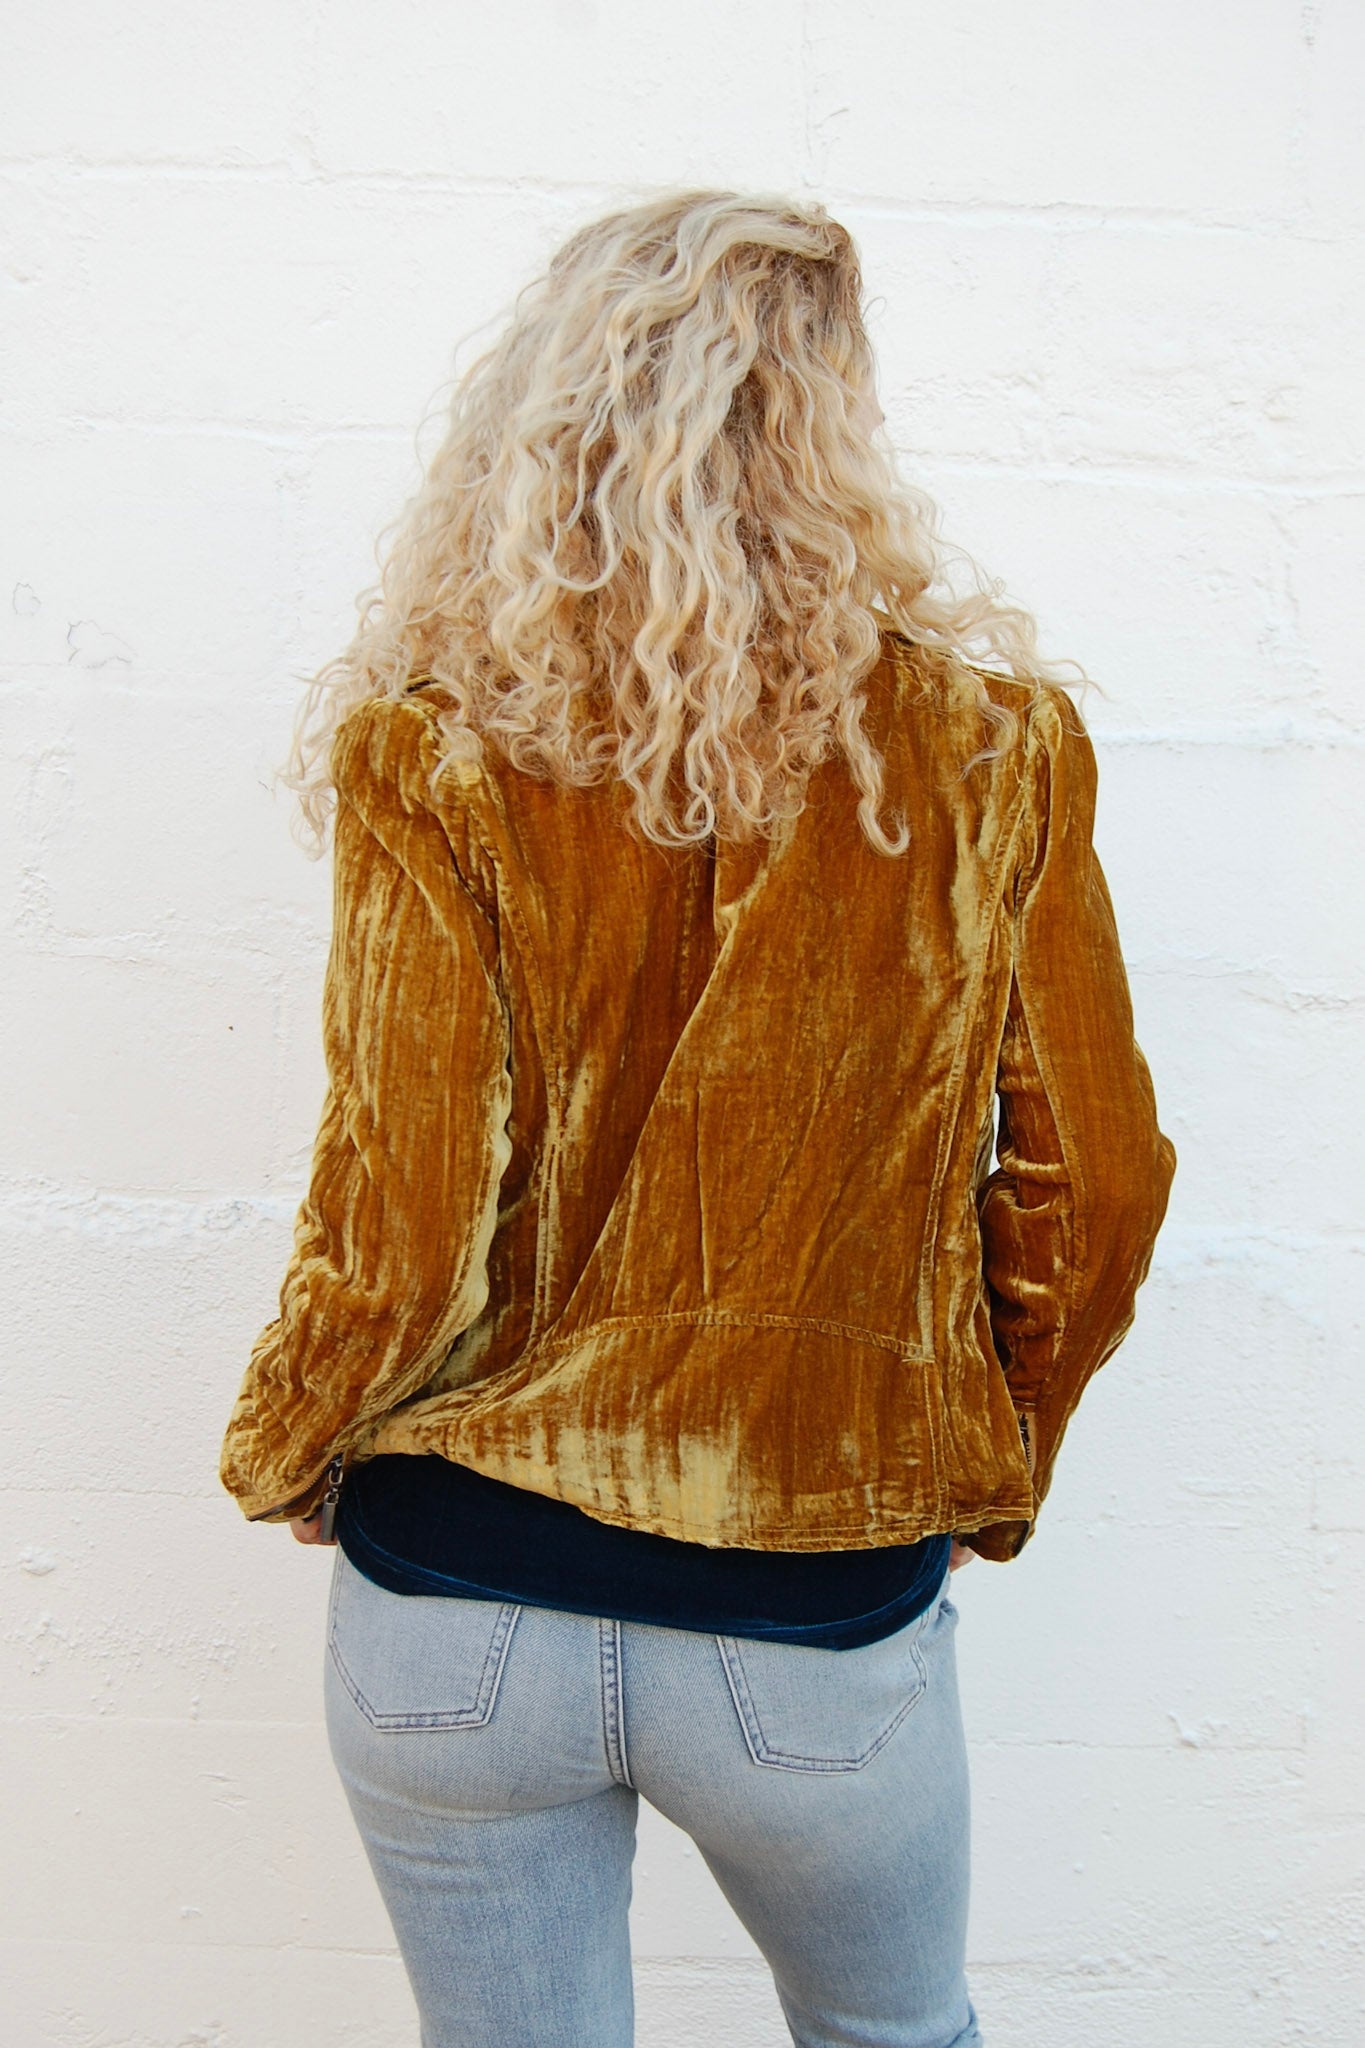 Load image into Gallery viewer, Crushed Panne Jacket in Gold - SpiritedBoutiques Boho Hippie Boutique Style Jacket, BIZ
